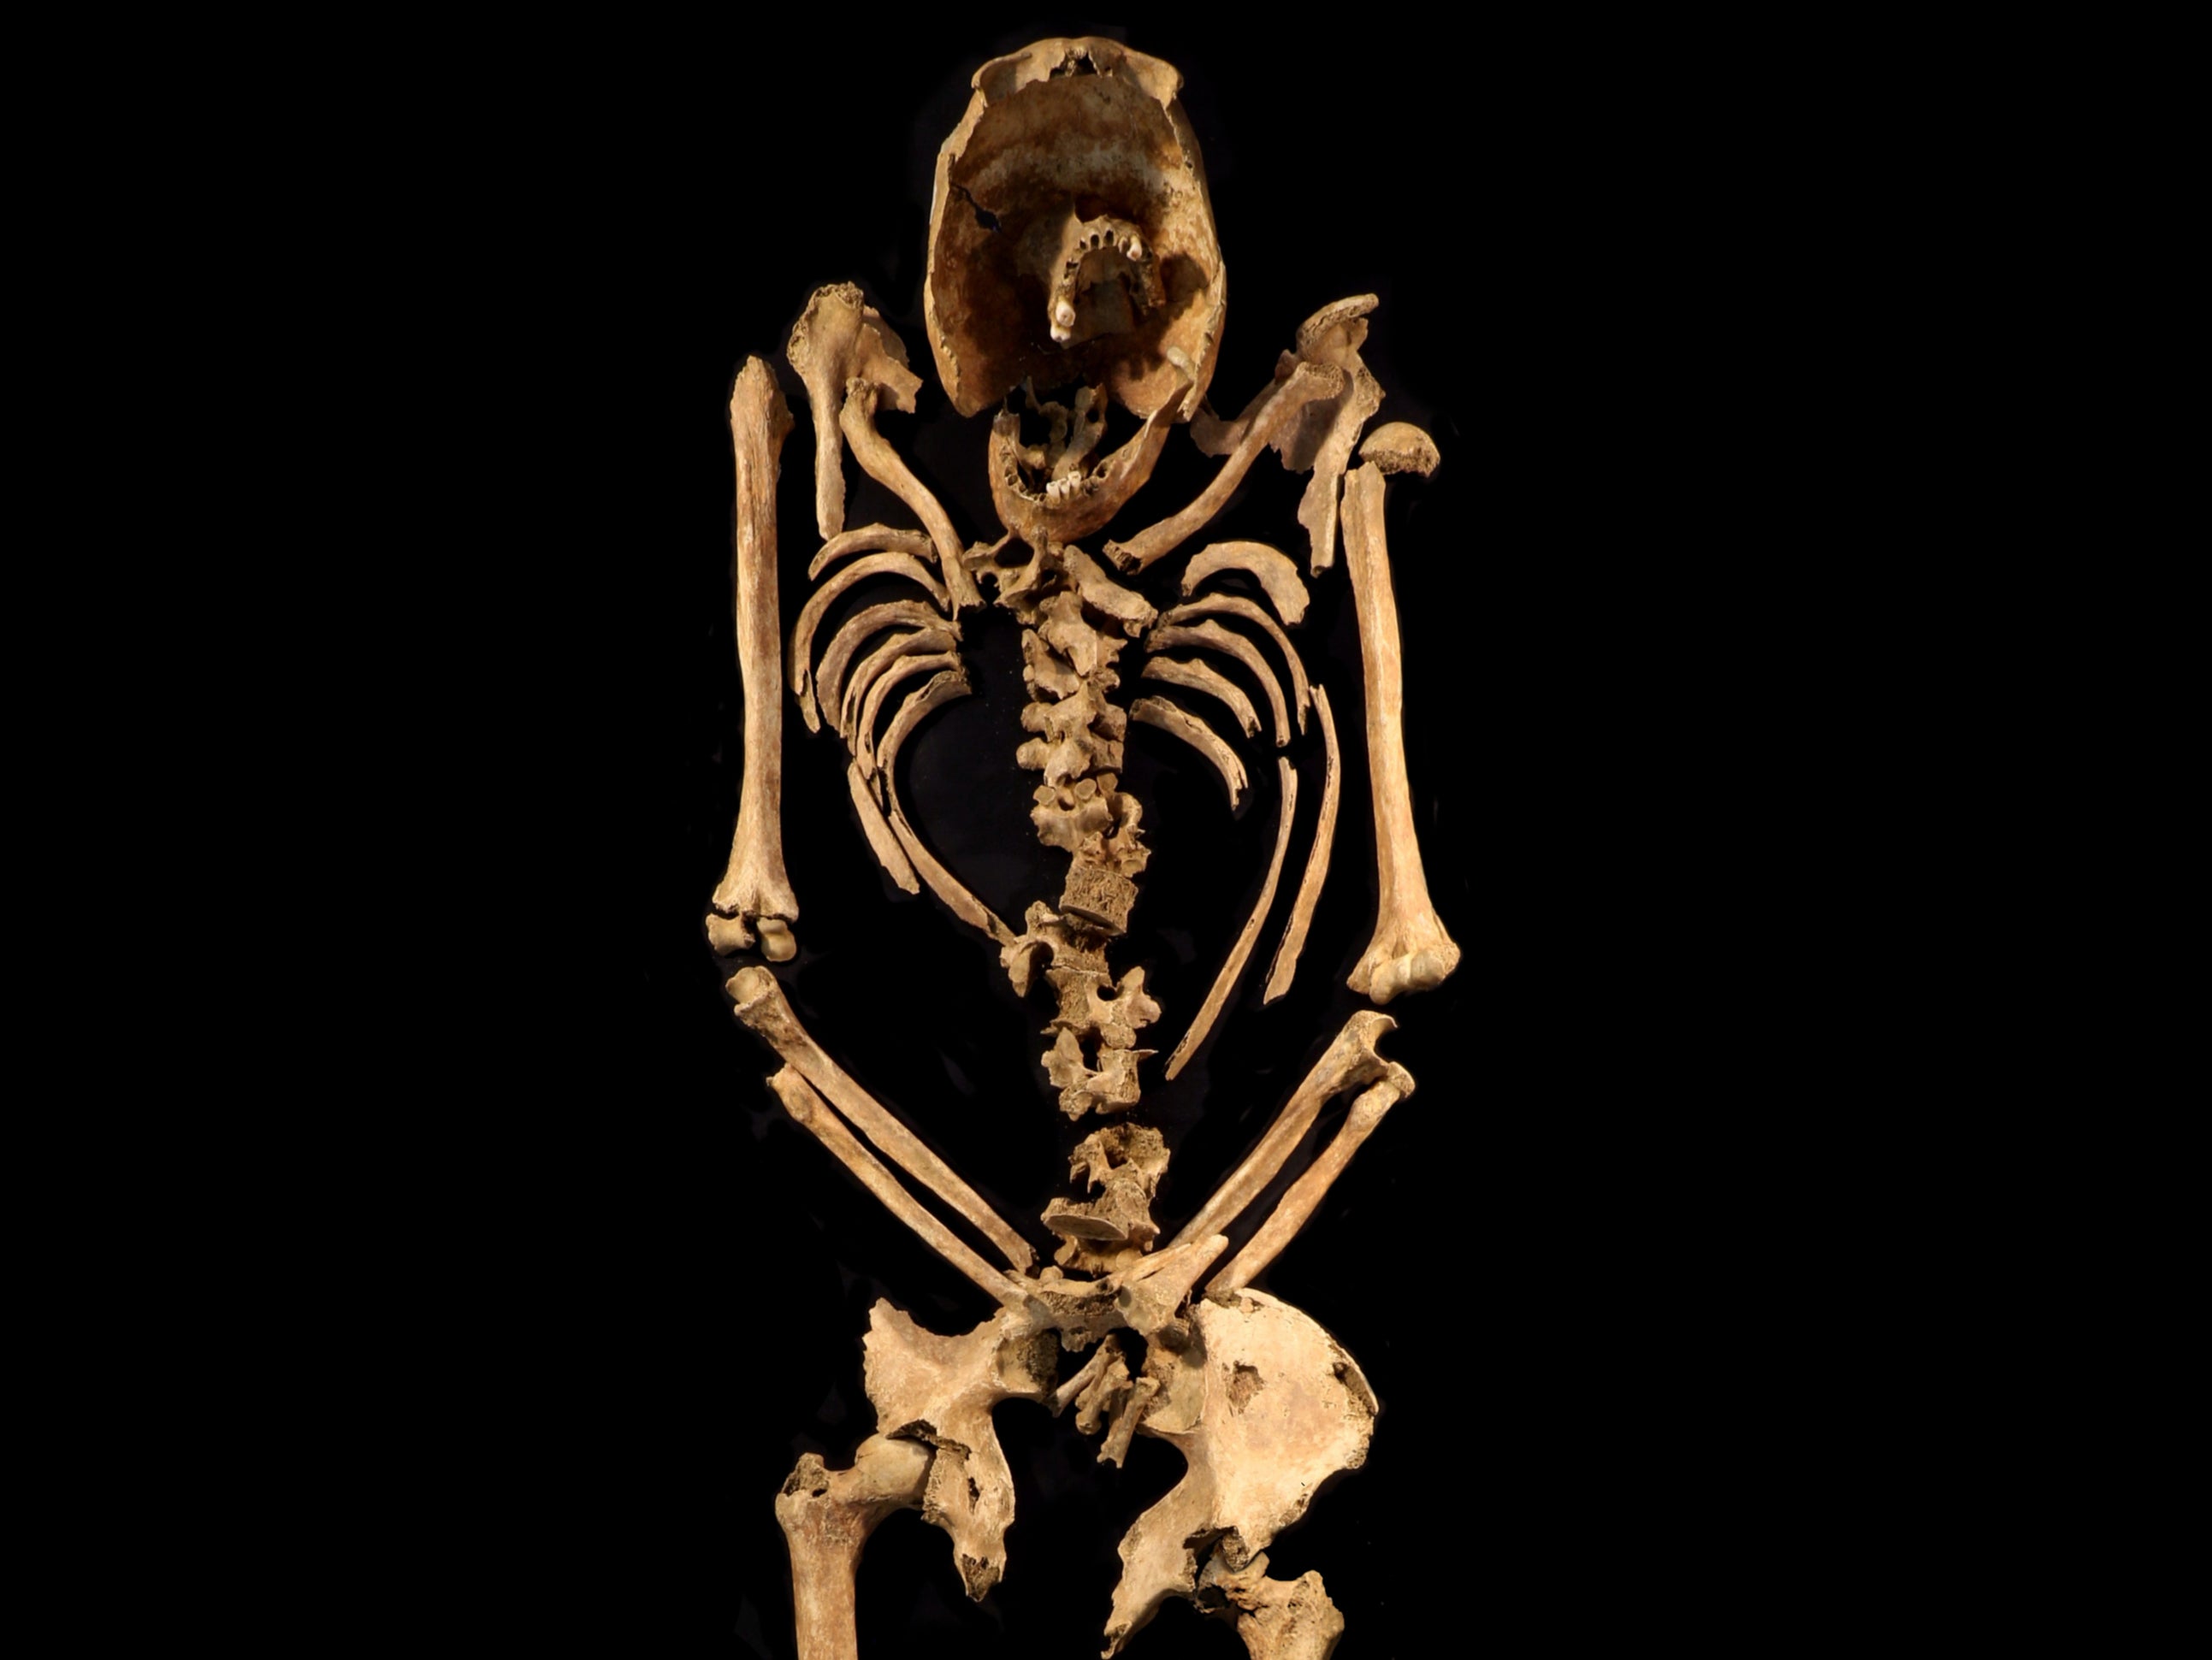 The remains of the man’s skeleton found in Fenstanton in Cambridgeshire